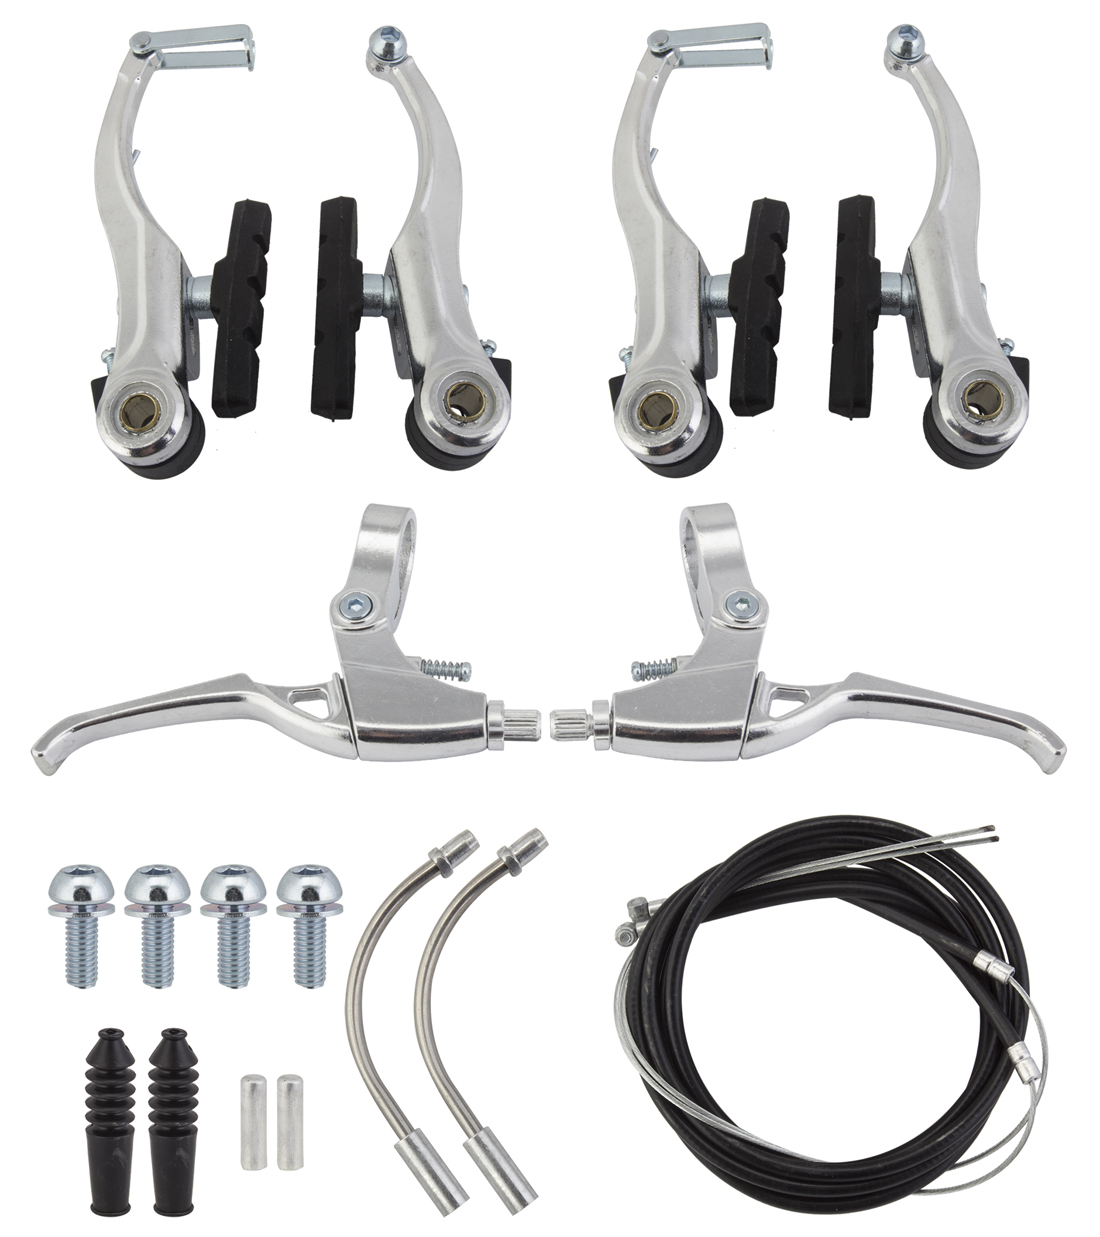 Brake Set Alloy V-Brake front & rear calipers with levers